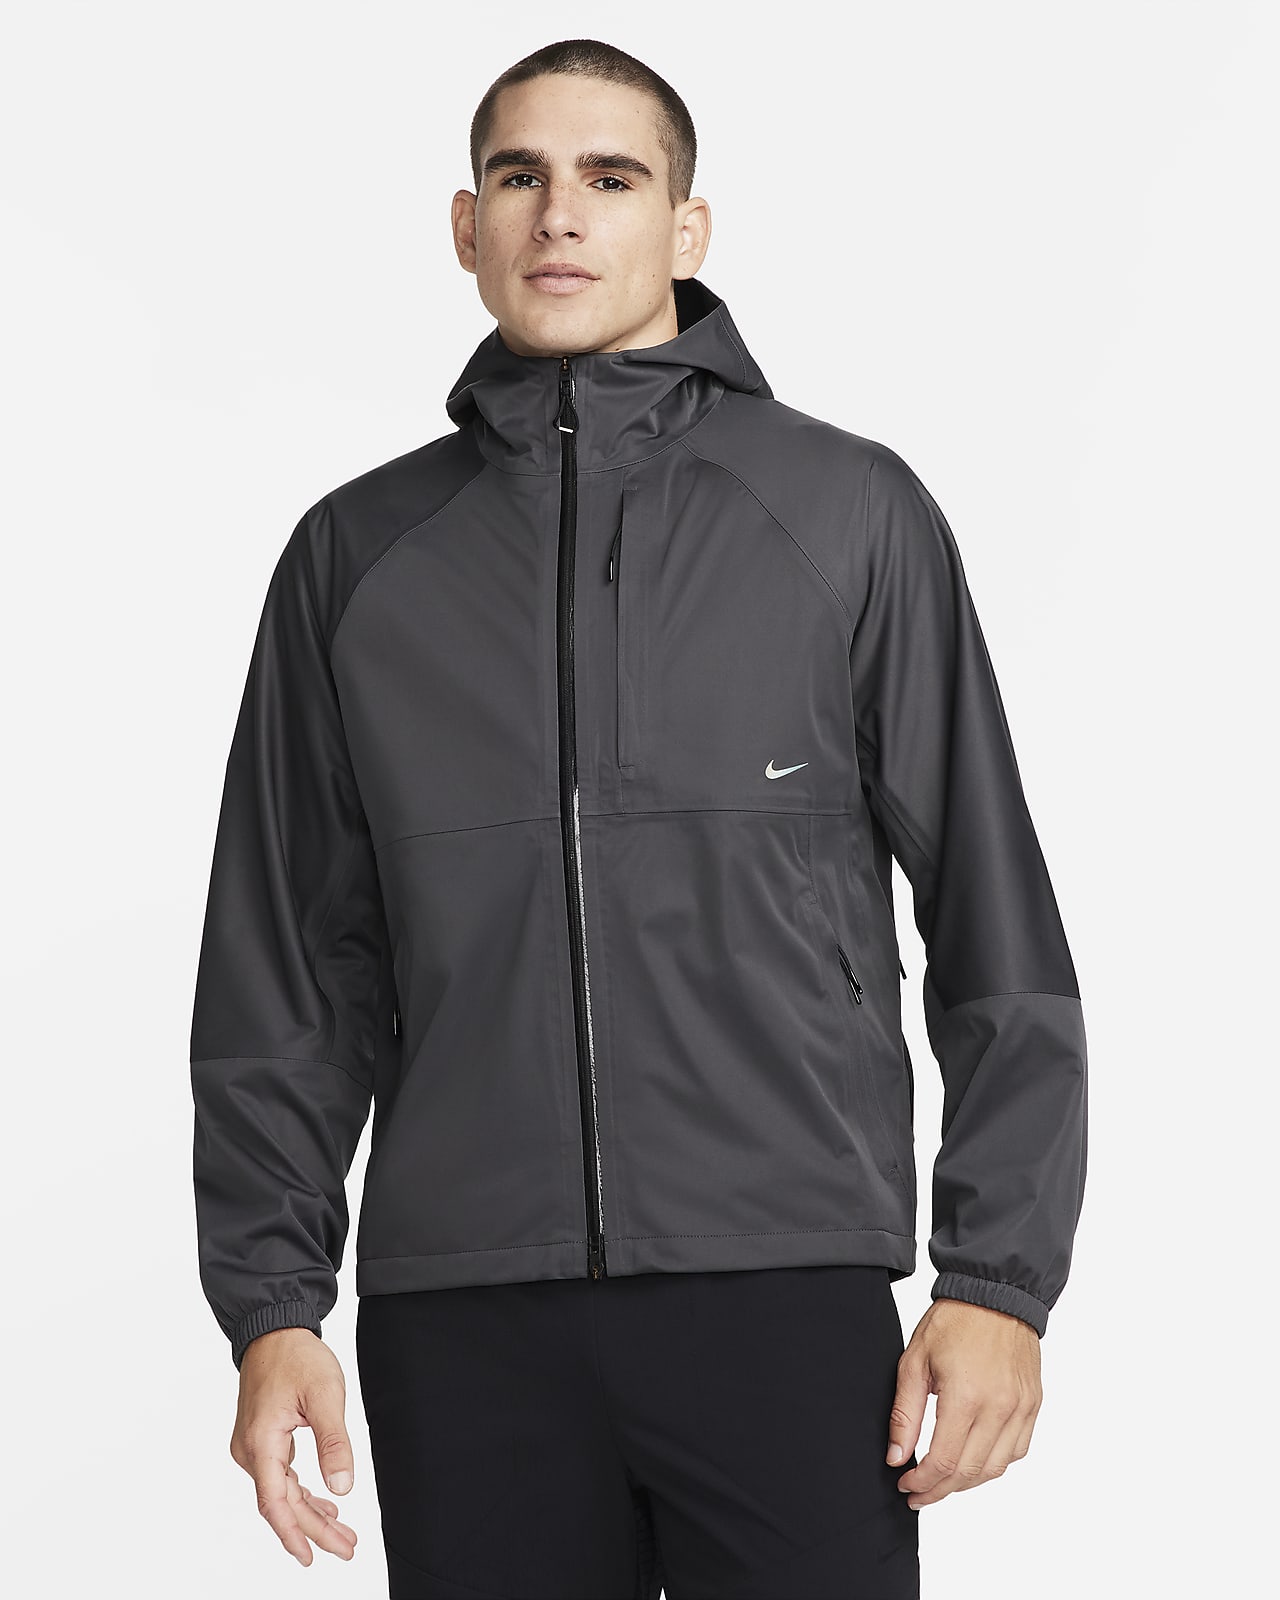 New and used Nike Tech Fleece Men's Jackets for sale